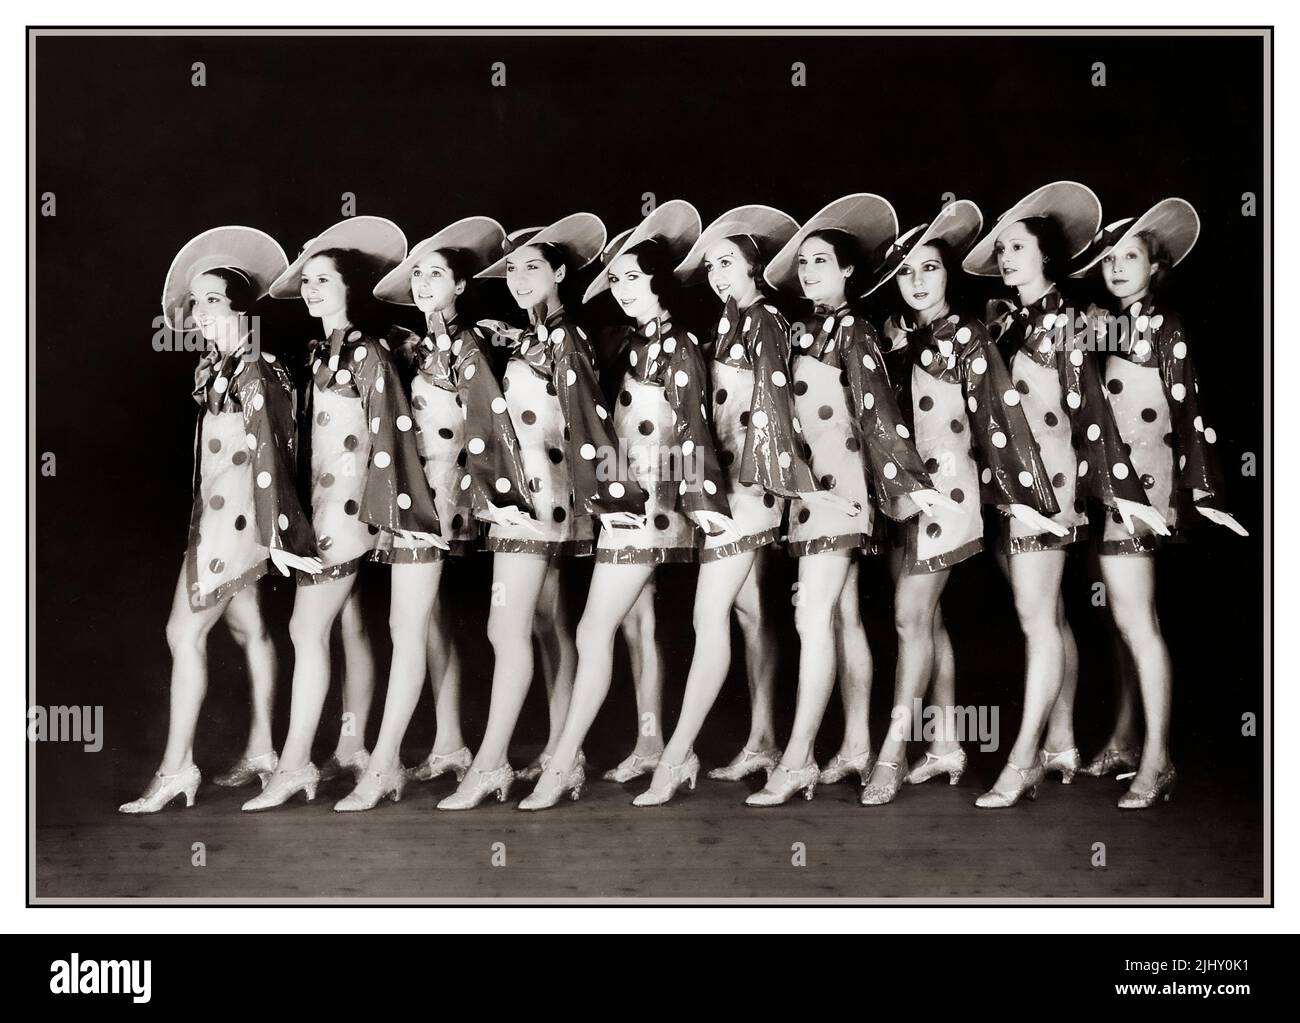 1930s Folies Bergere Showgirls  pose on stage for a promotional photograph. All beautiful handpicked girls, including Feo Mustakova renowned Bulgarian ballerina, dancing for one of Paris's foremost Bell Epoque cabaret spectacle music hall dancing shows. Rue Richer Paris France 1934 Stock Photo